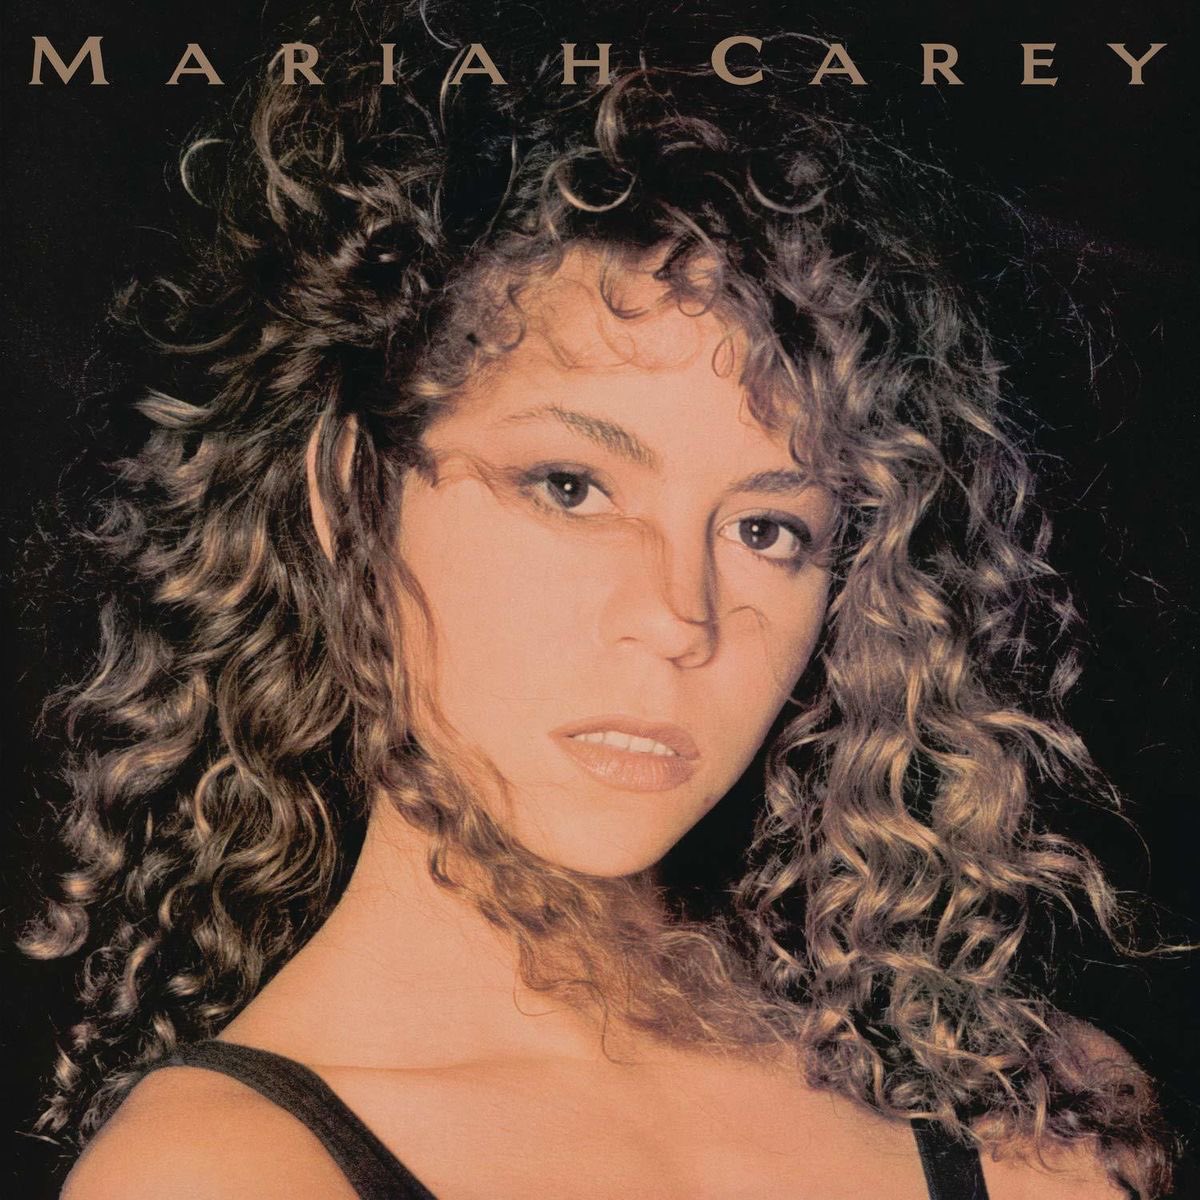 okaayy guys i’m so excited here we go with debut album 'Mariah Carey' !! i just wanna start by saying that this album is REALLY underrated and that it should be appreciated a lot more in the lambily and overall